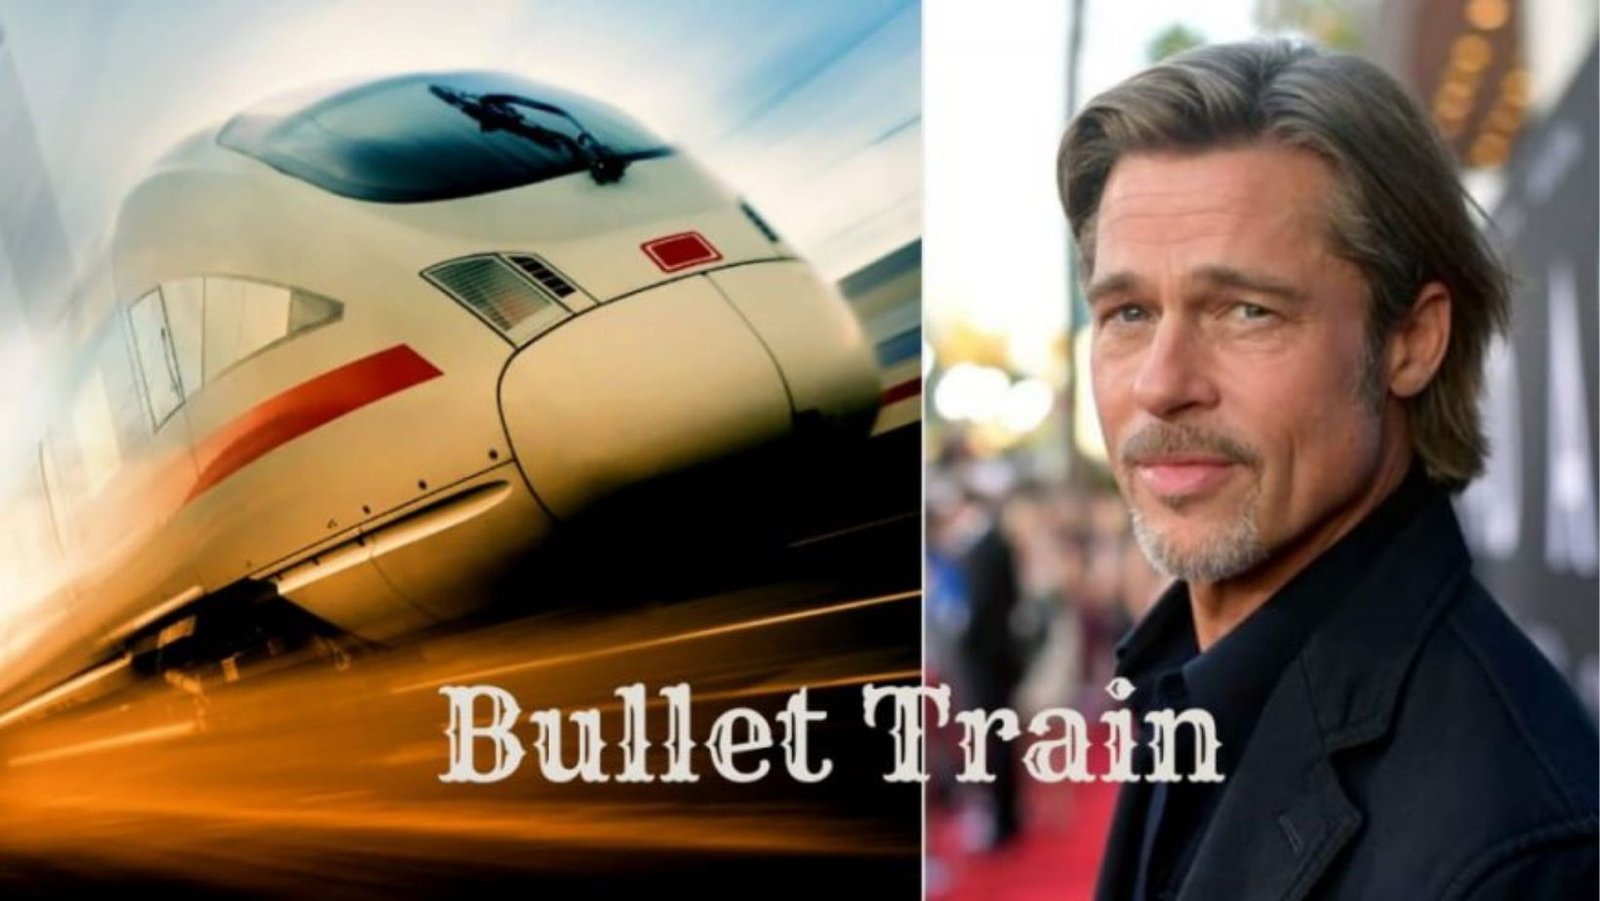 "Bullet Train" rockets to the top of the box office in North America